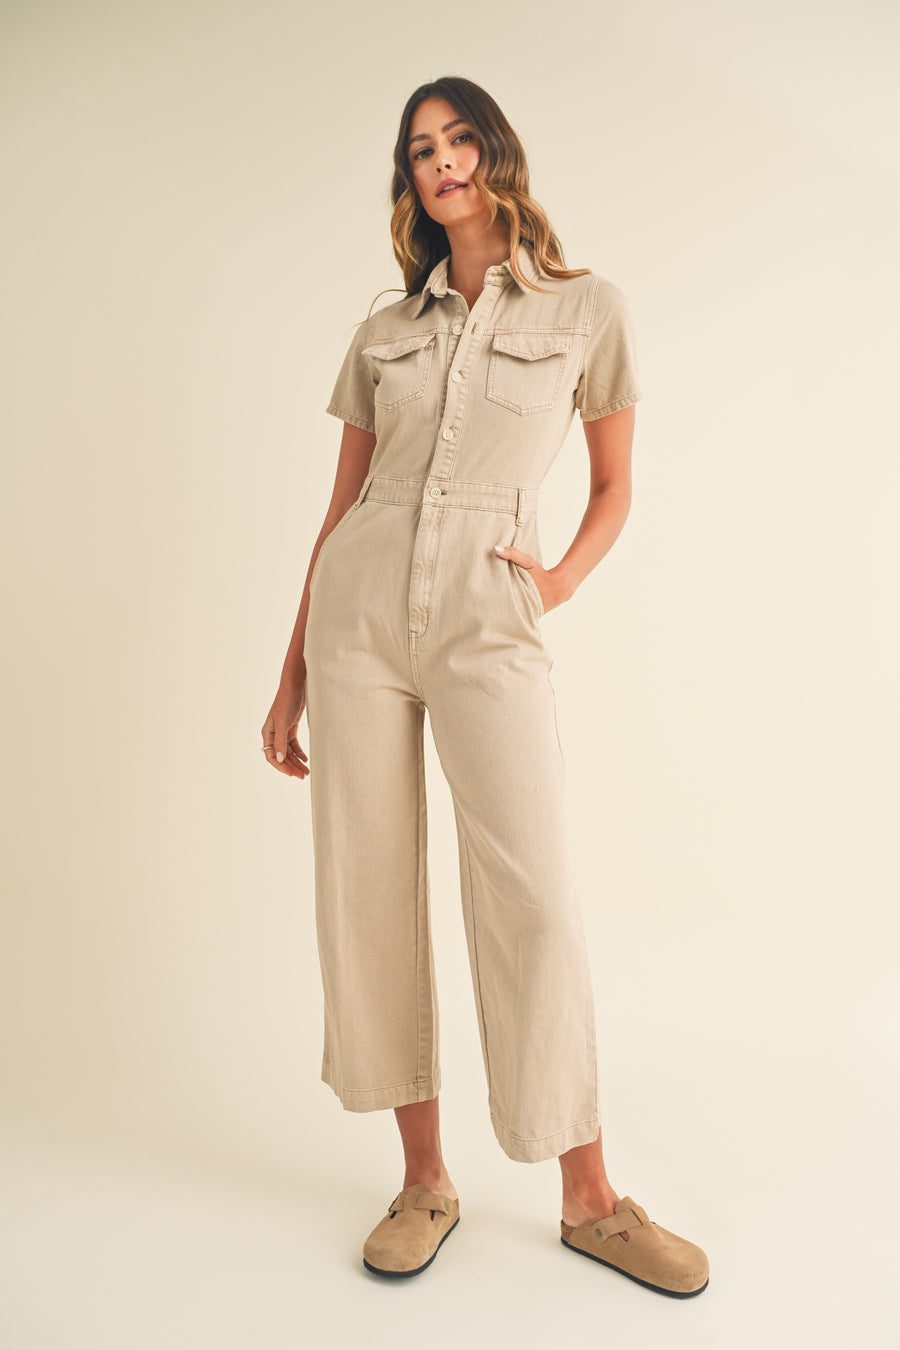 Light Taupe jumpsuit with short sleeves and front pockets. 